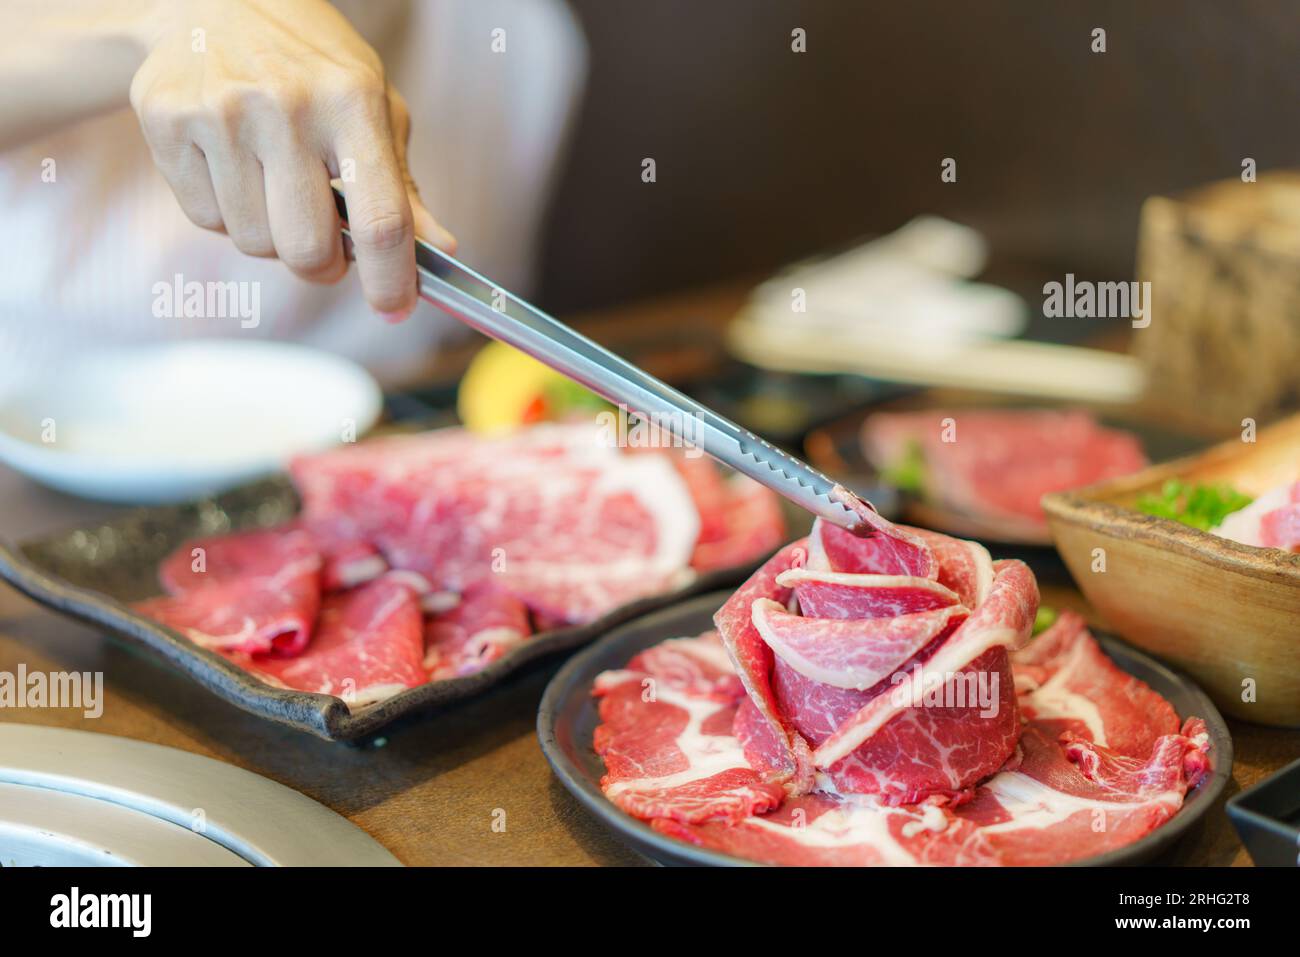 woman's hand employs tongs to place wagyu beef on a plate, ready to grill over charcoal, enhancing the dining experience at a Japanese restaurant Stock Photo